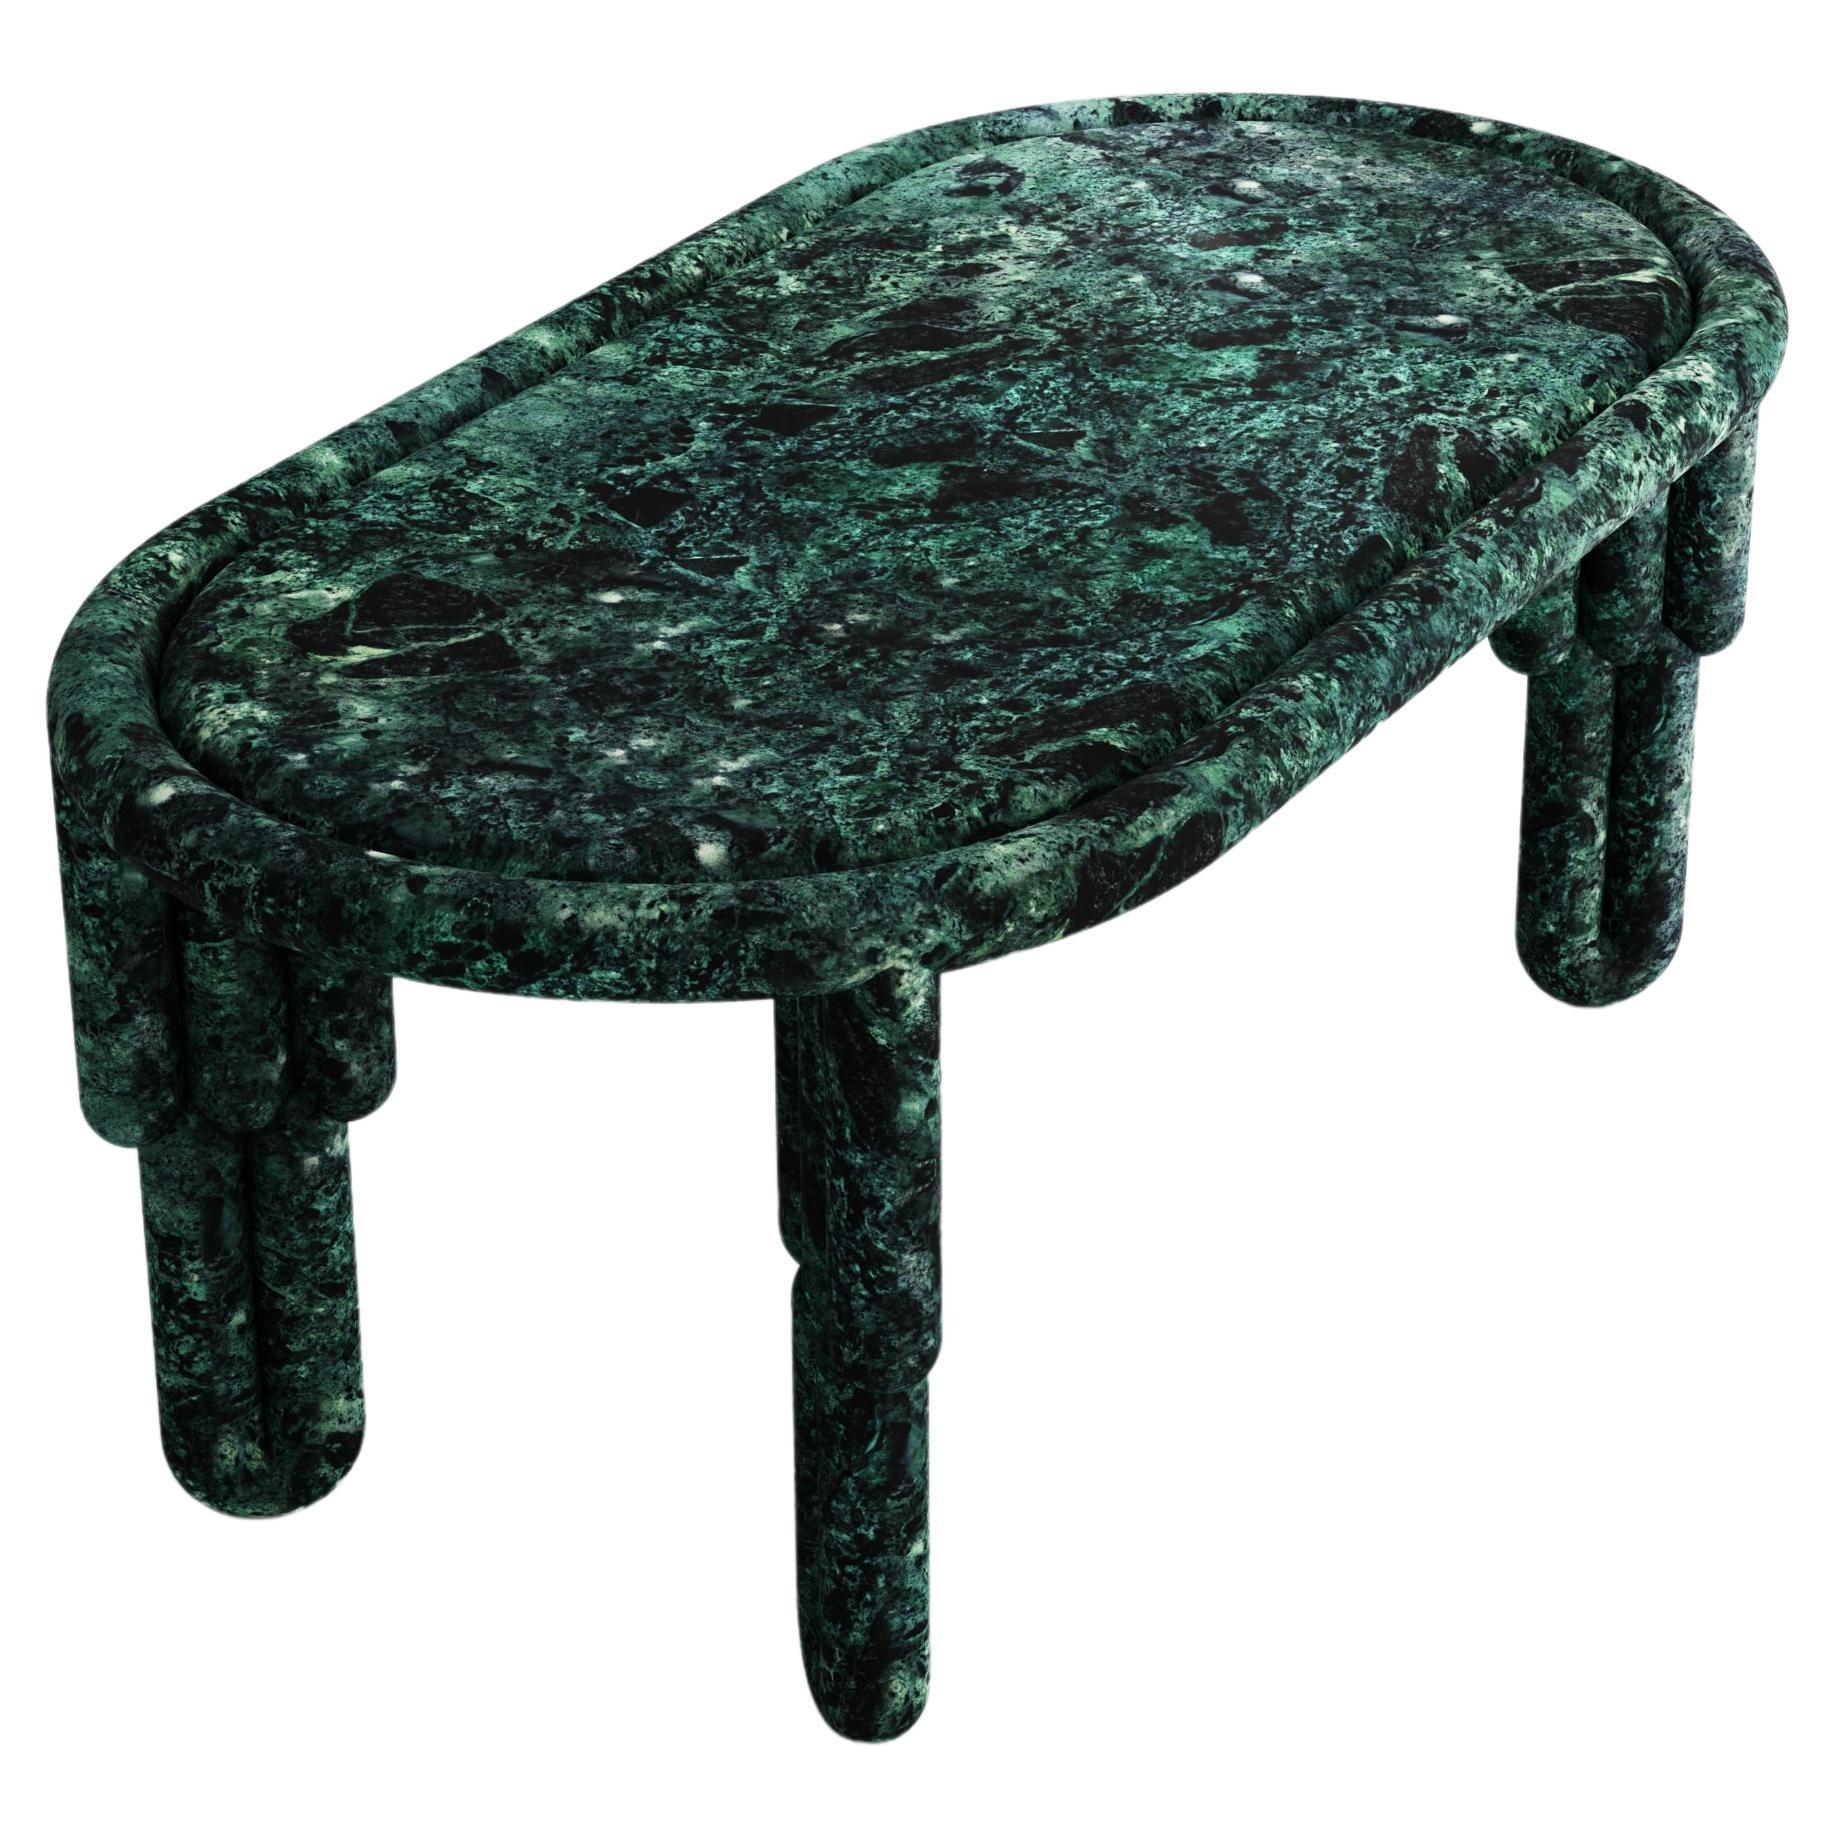 Sculptural Kipferl Dining Table by Lara Bohinc in Verde Alpi Marble For Sale